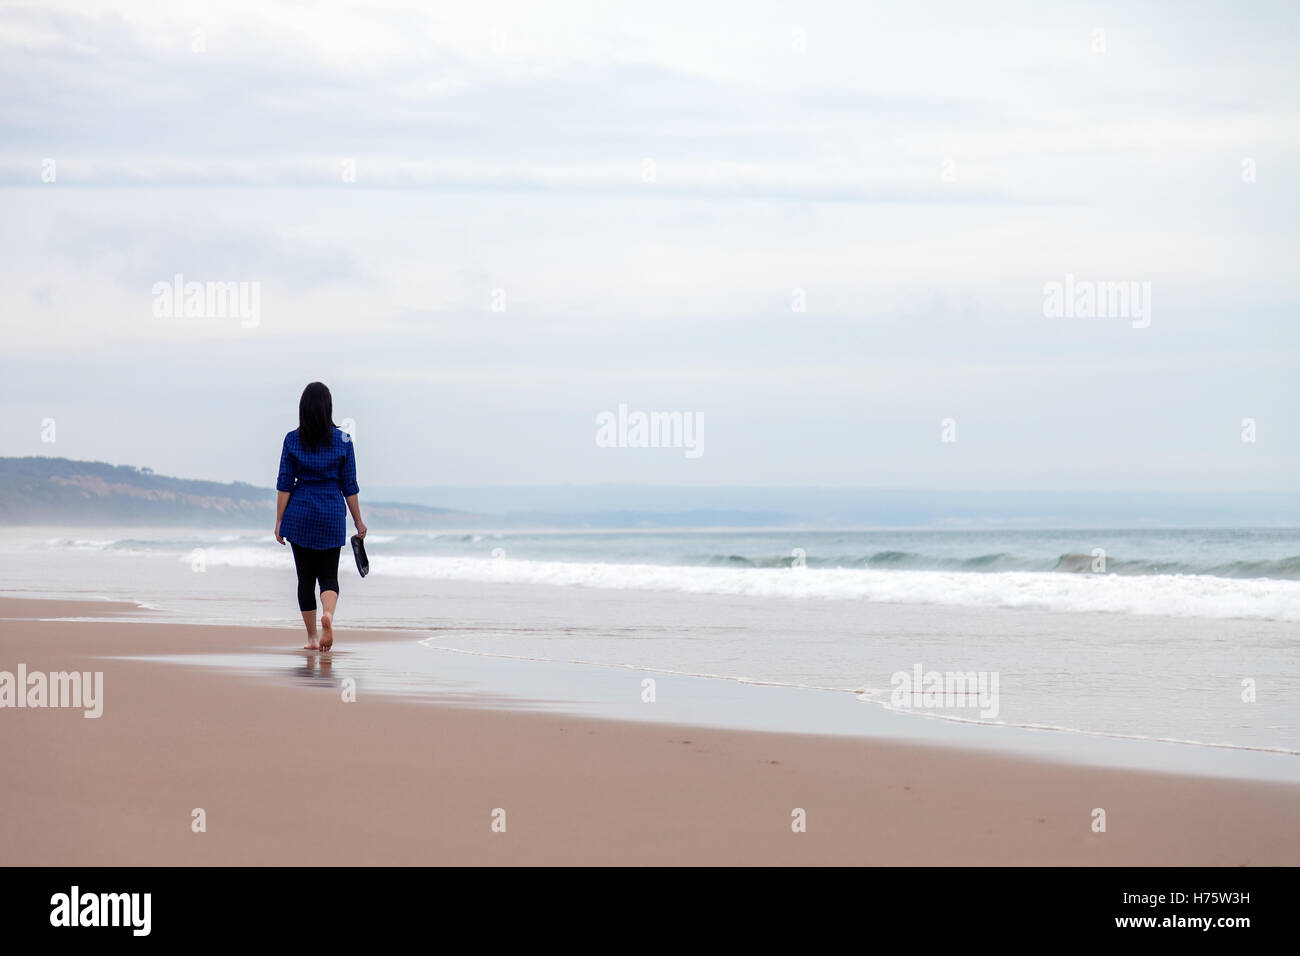 Young woman walking away alone in a deserted beach on an Autumn day. Stock Photo